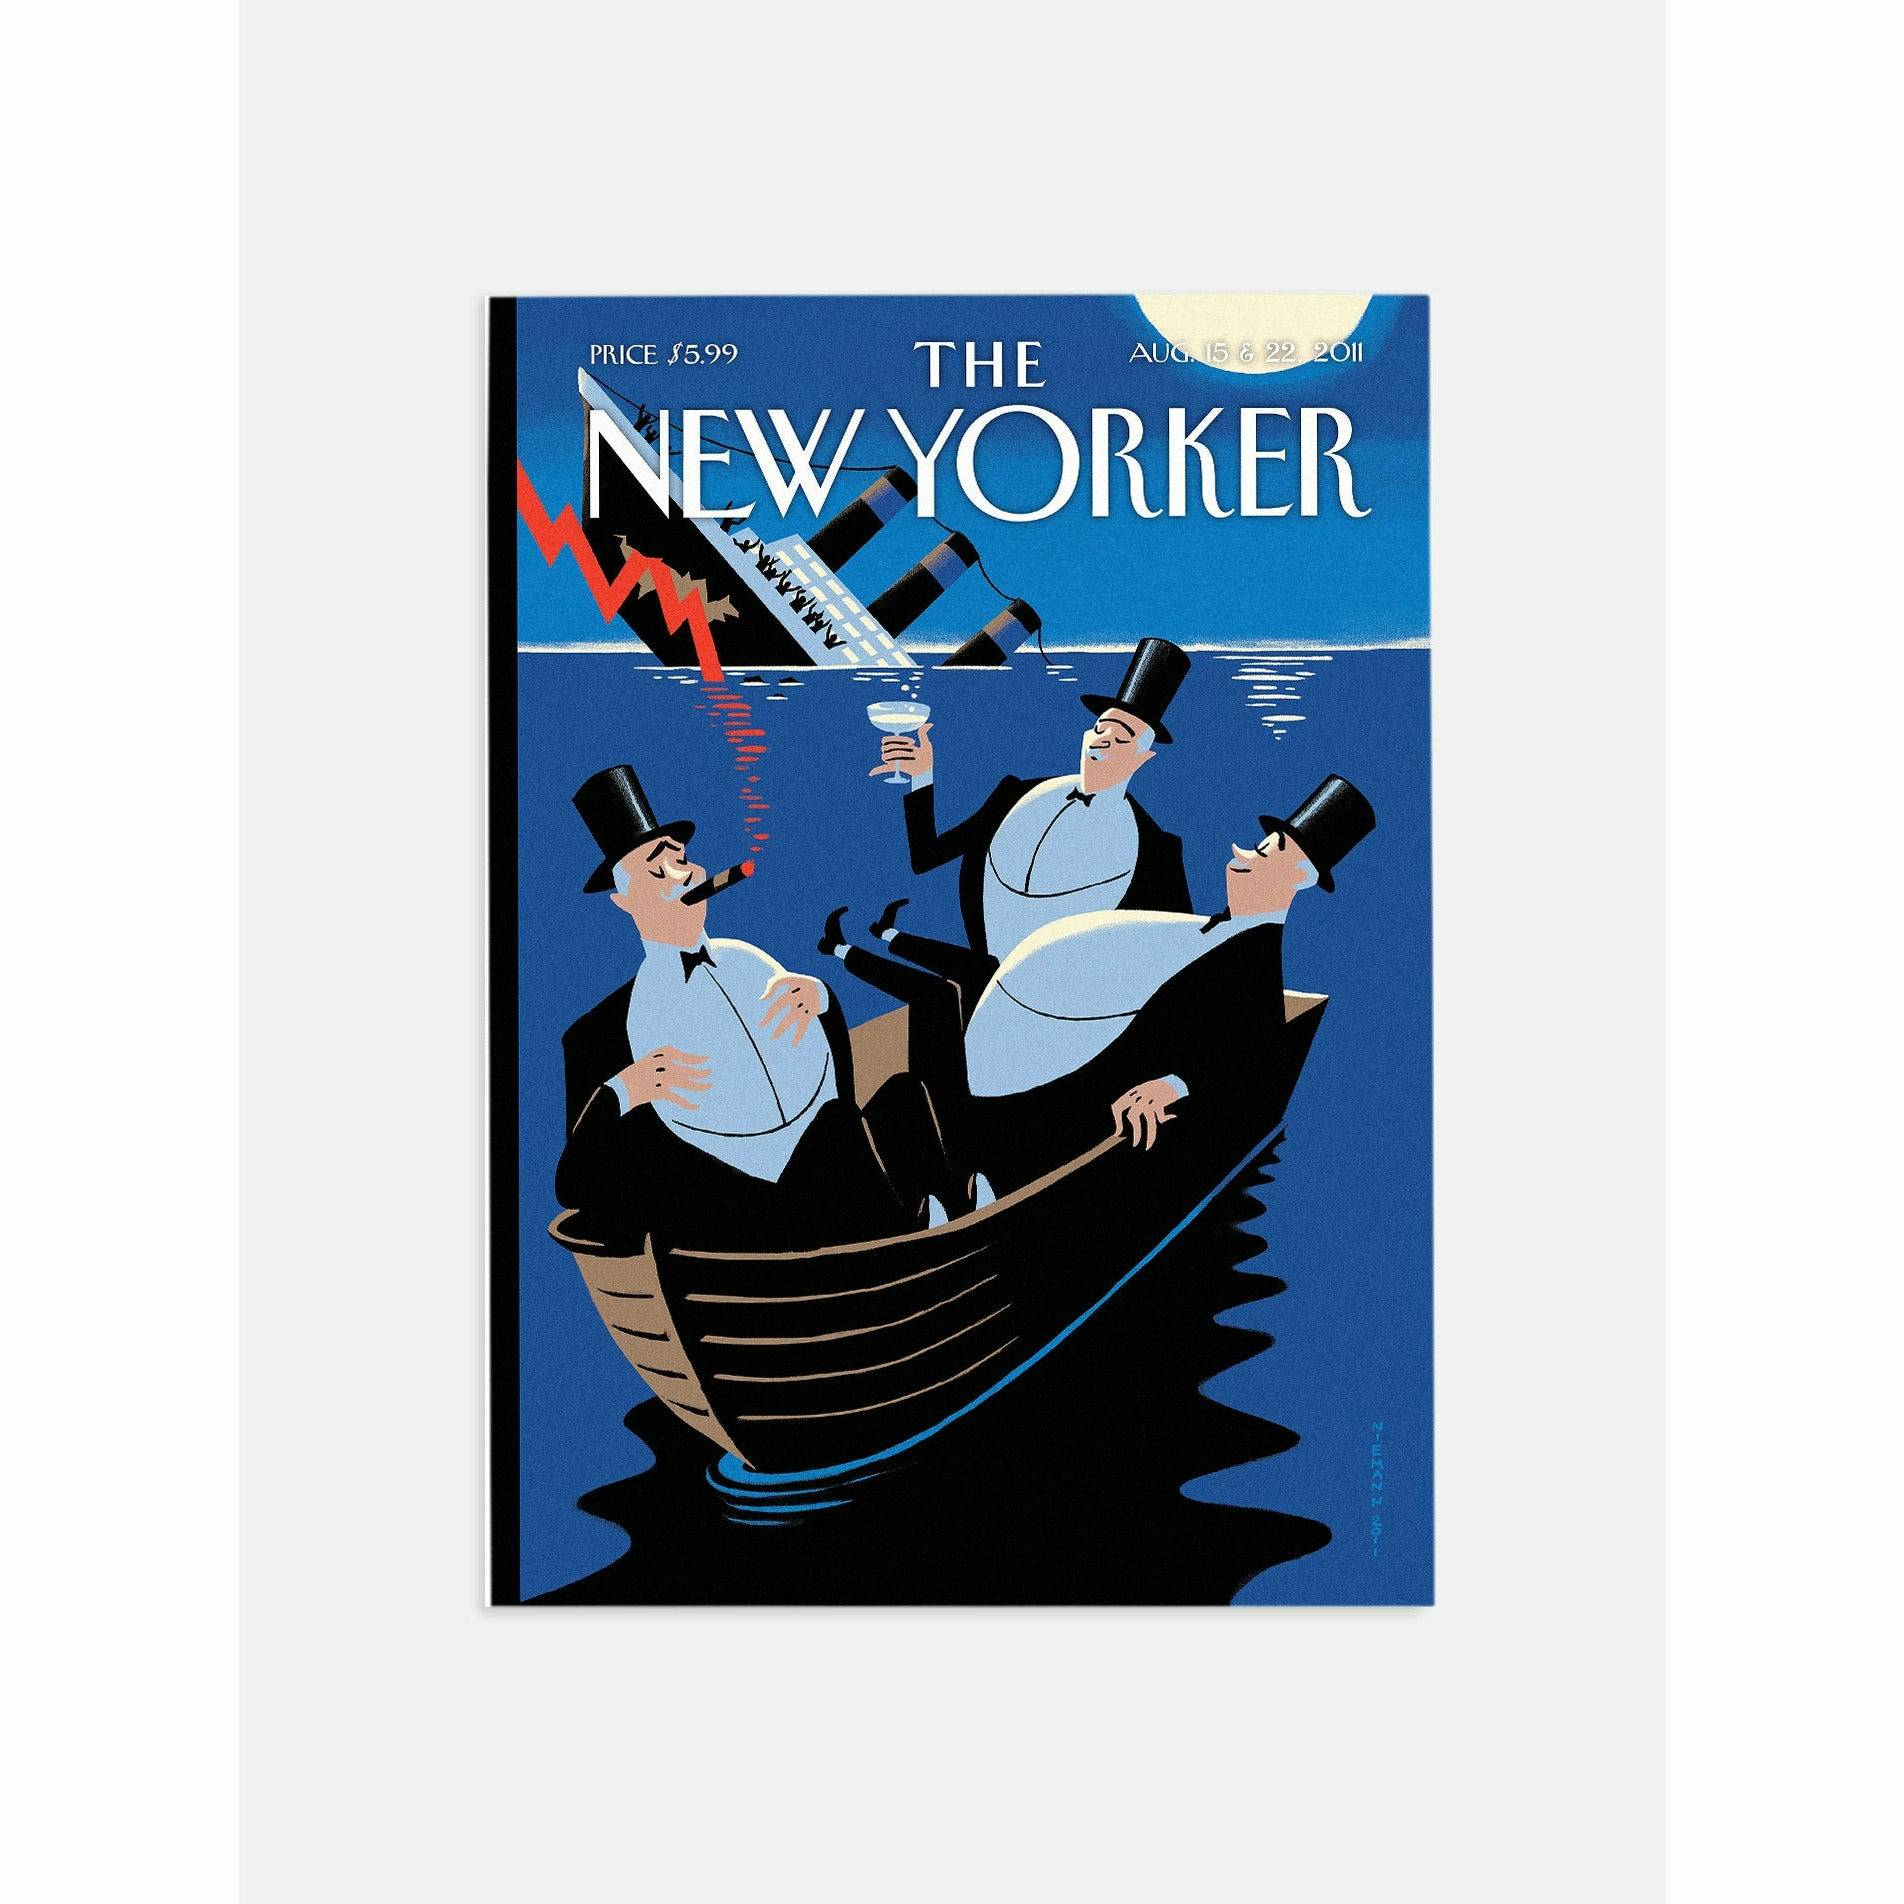 The New Yorker 2011